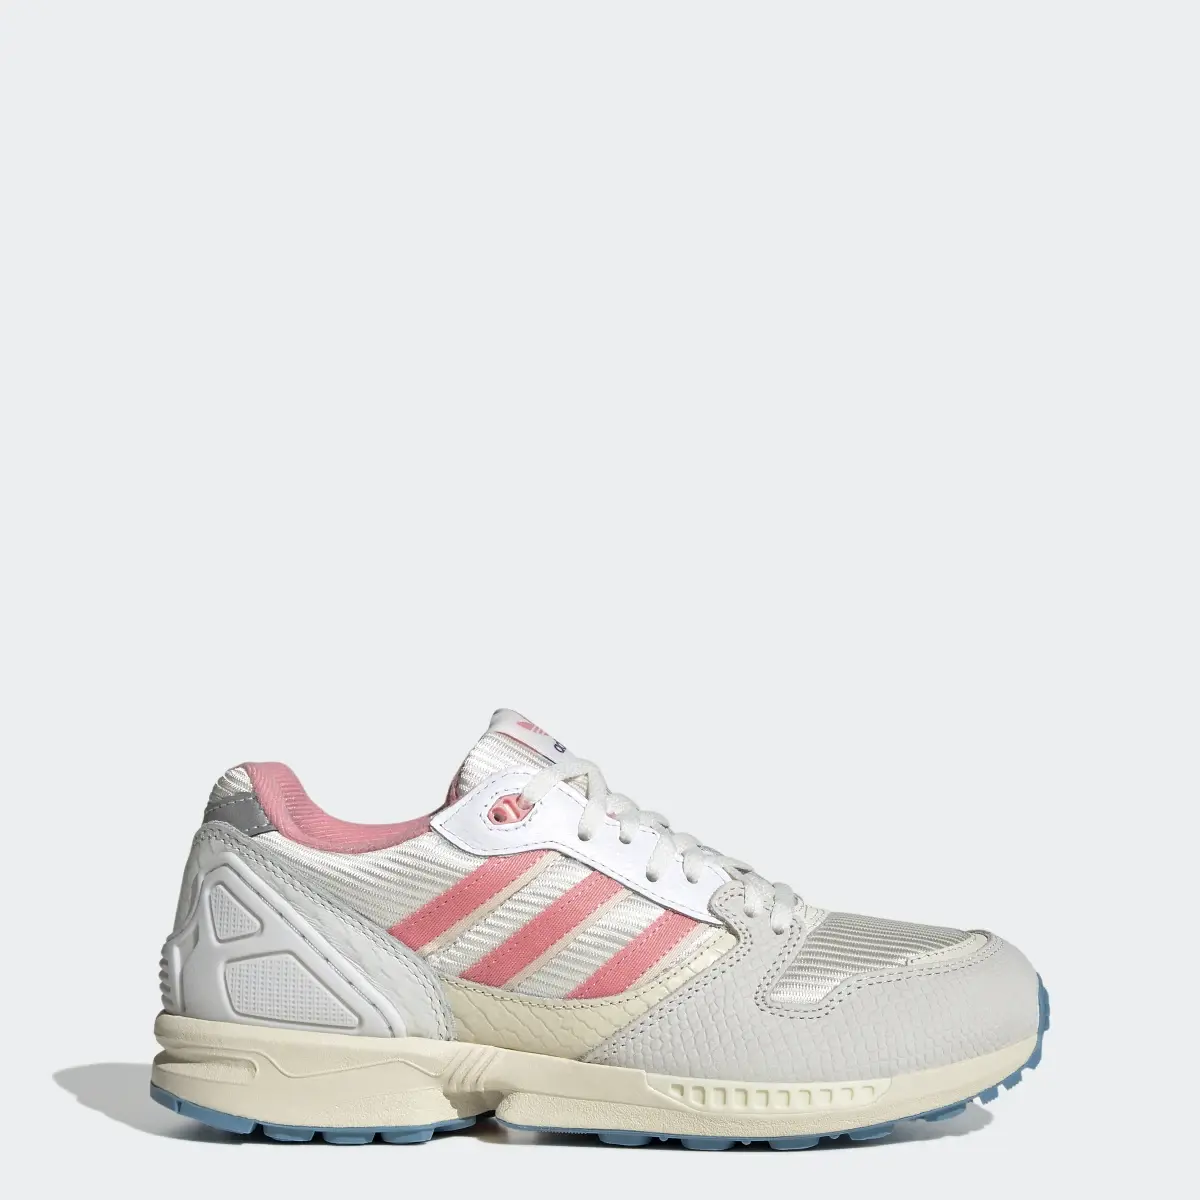 Adidas ZX 5020 Shoes. 1